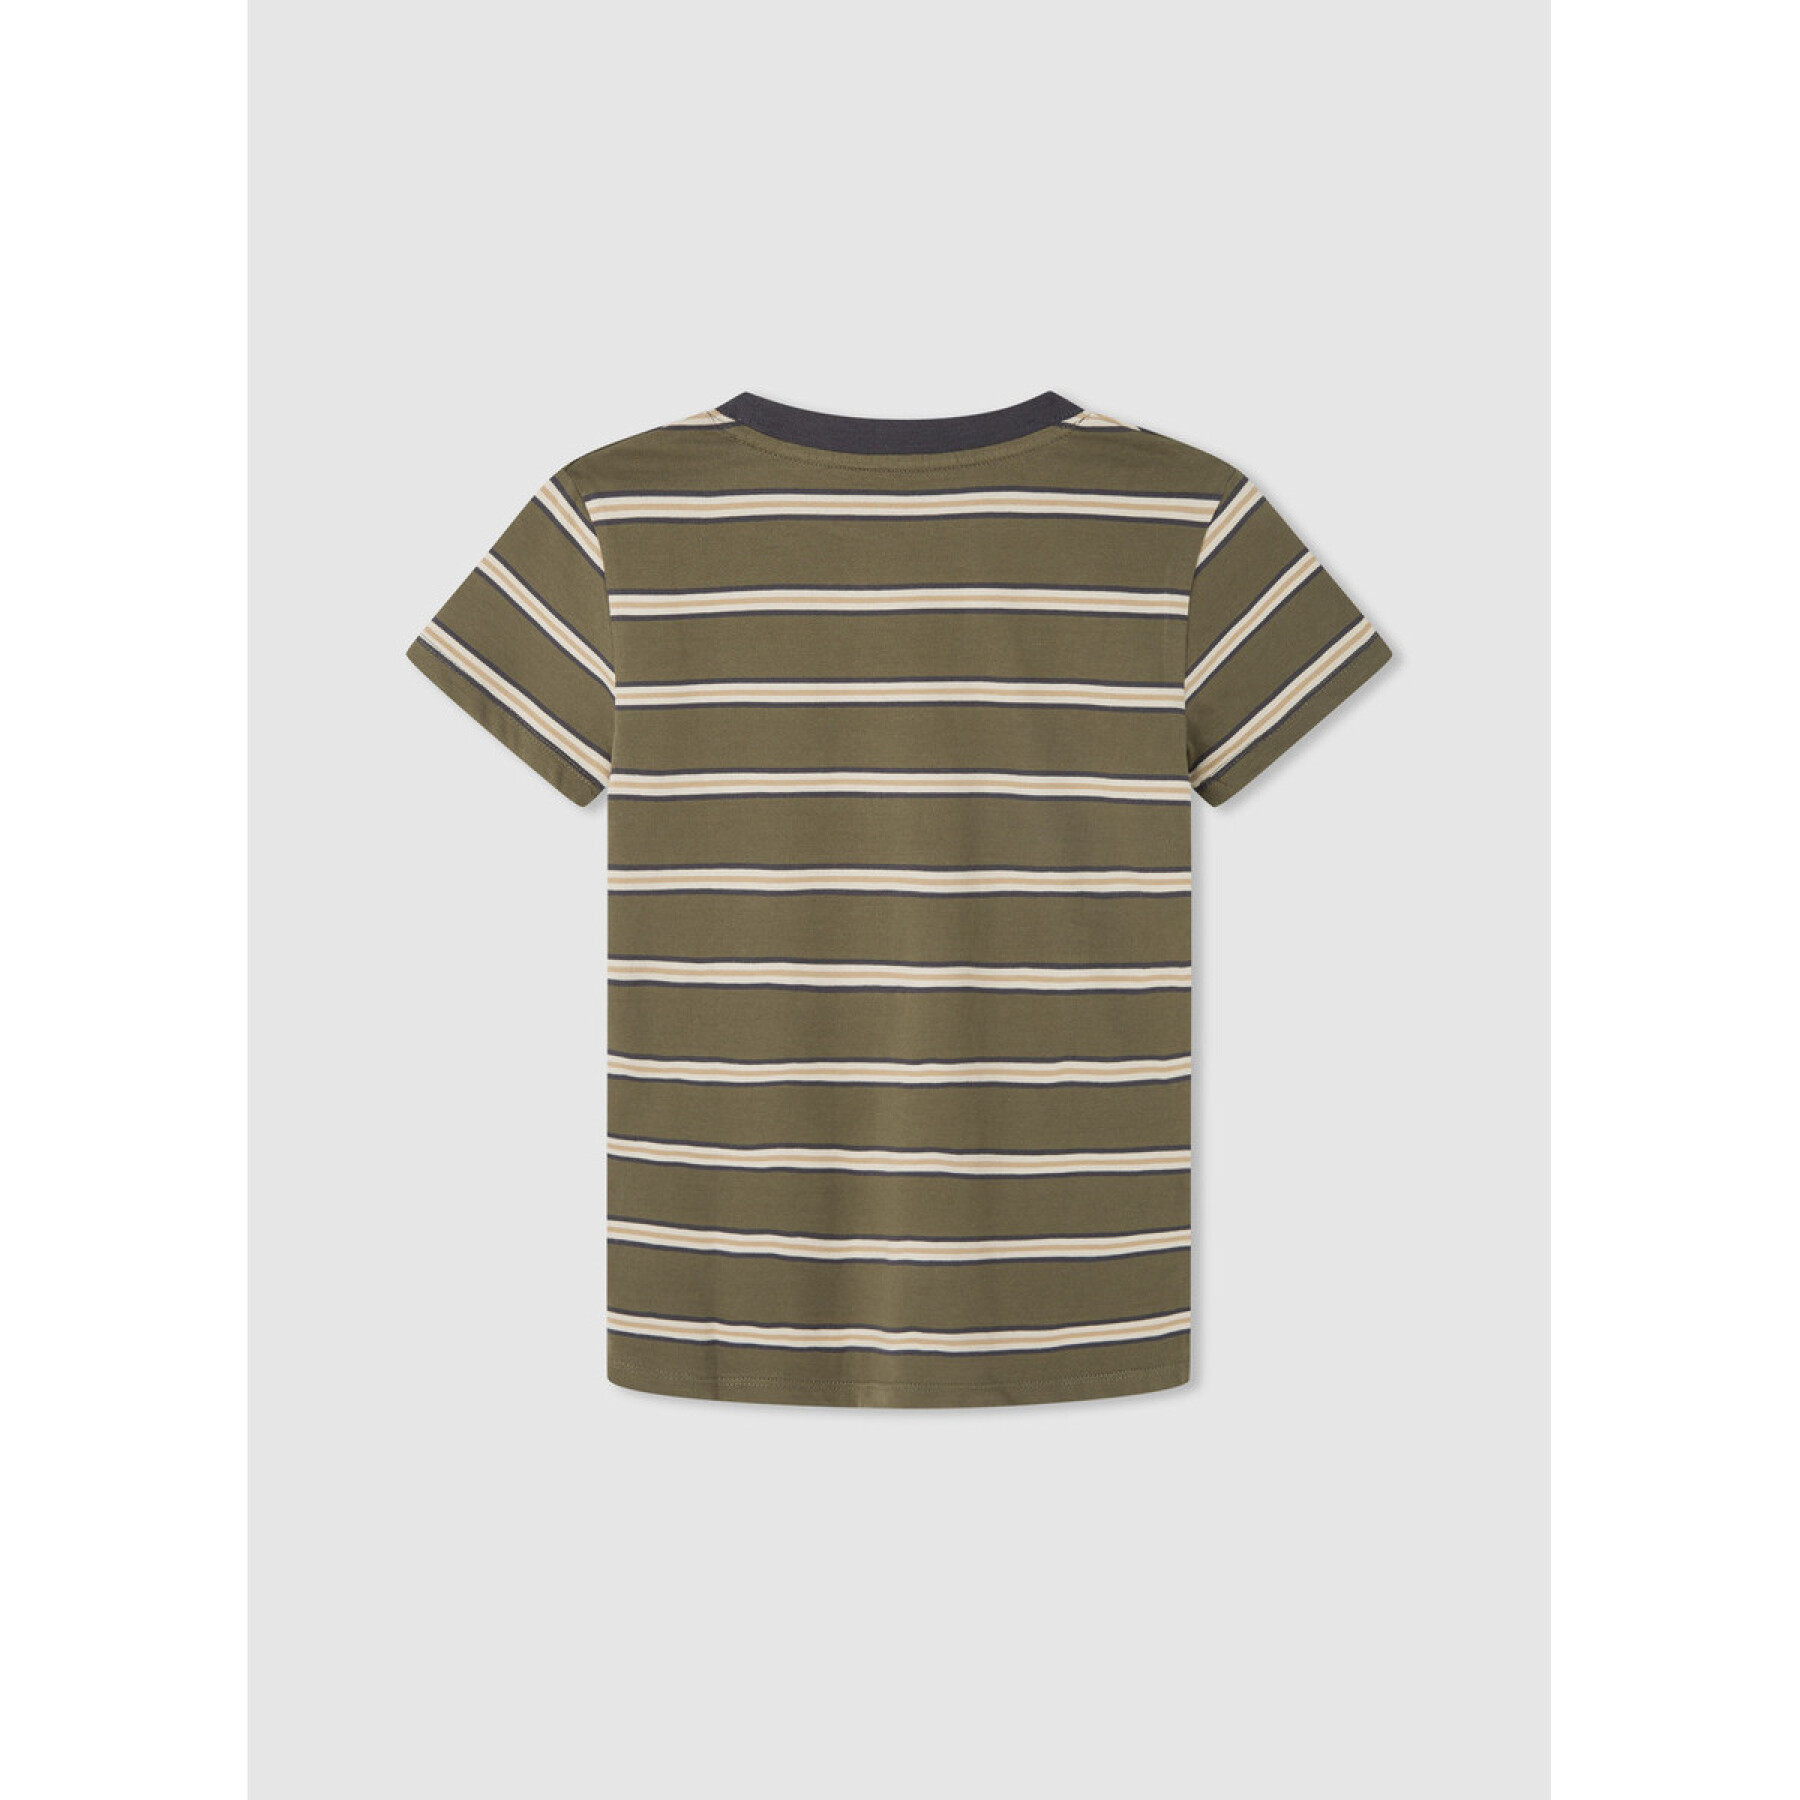 T-Shirt Pepe Jeans Ray